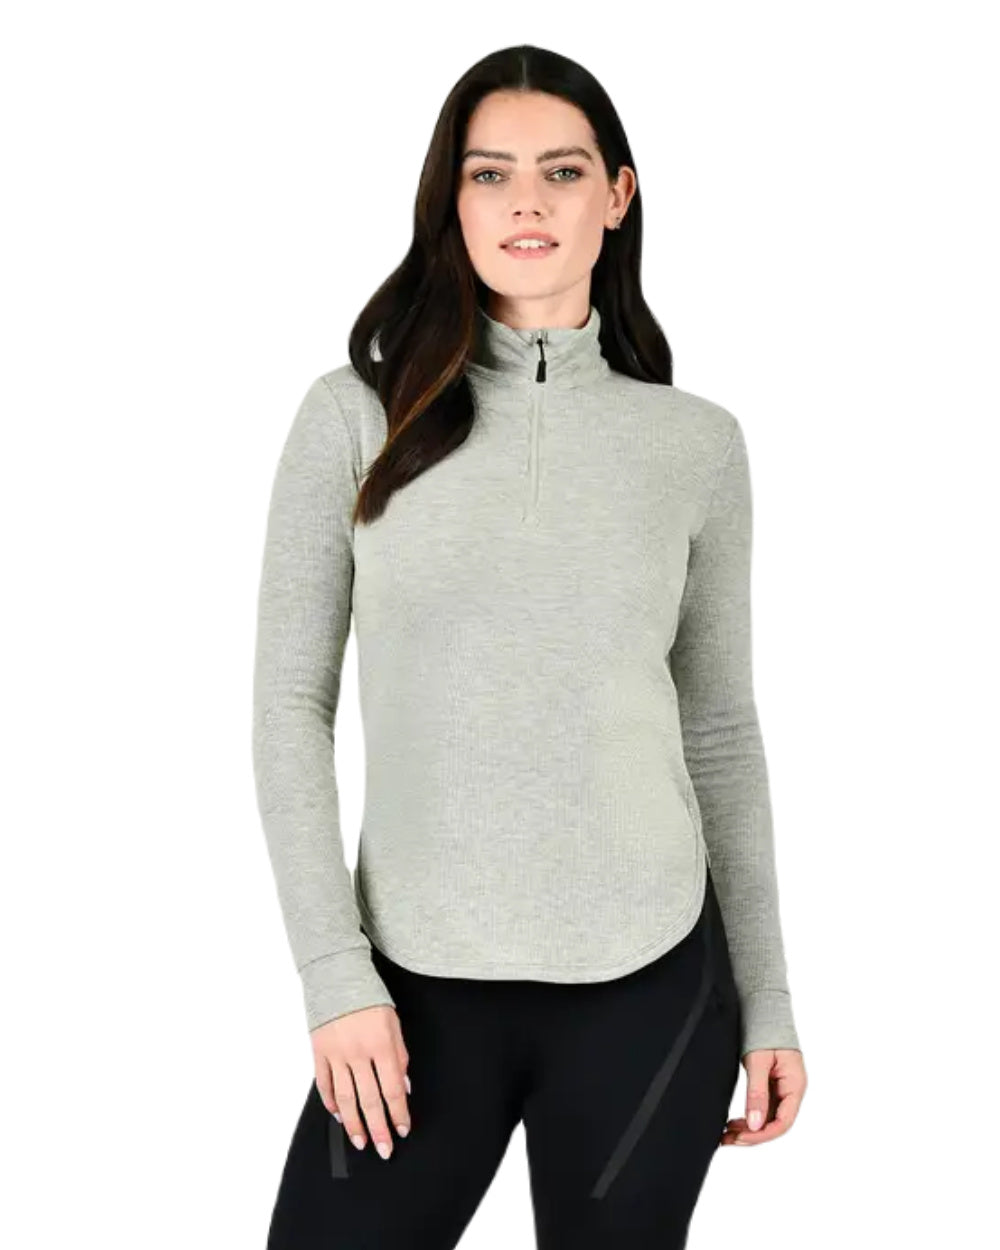 Dusty Olive Coloured WeatherBeeta London Layer Long Sleeve Top On A White Background 